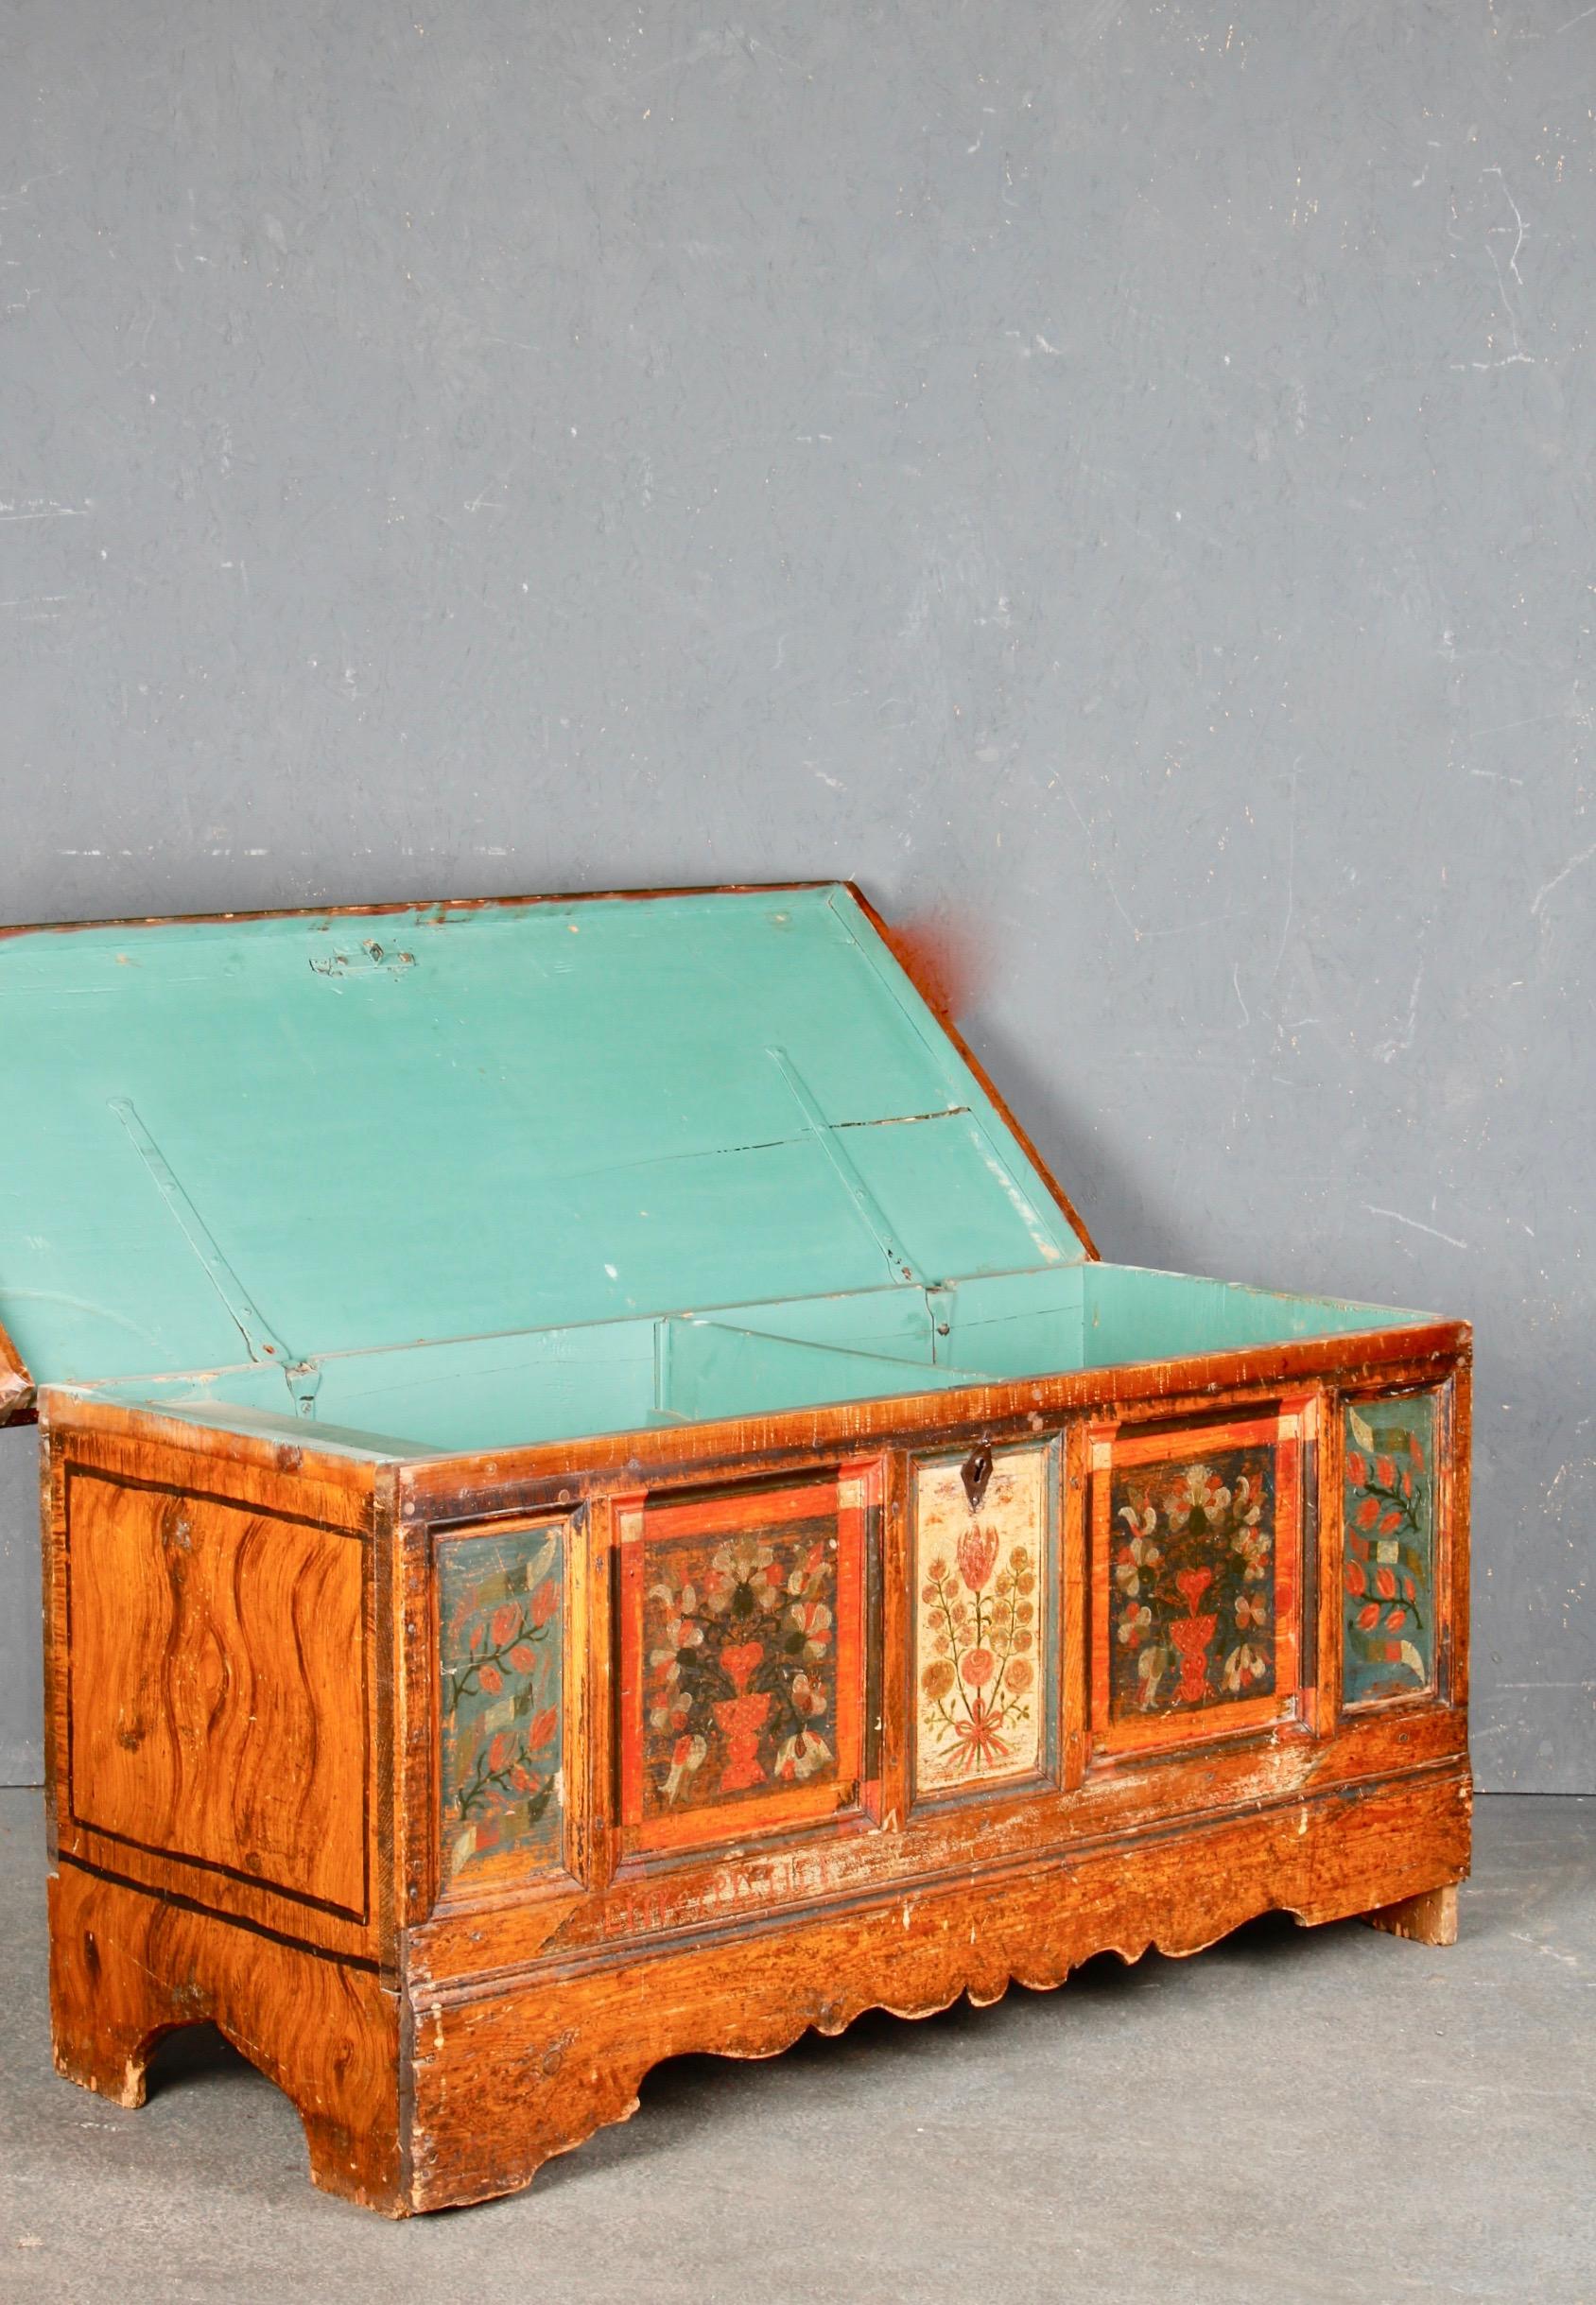 19th Century Swiss Alp Painted Pine Trunk For Sale